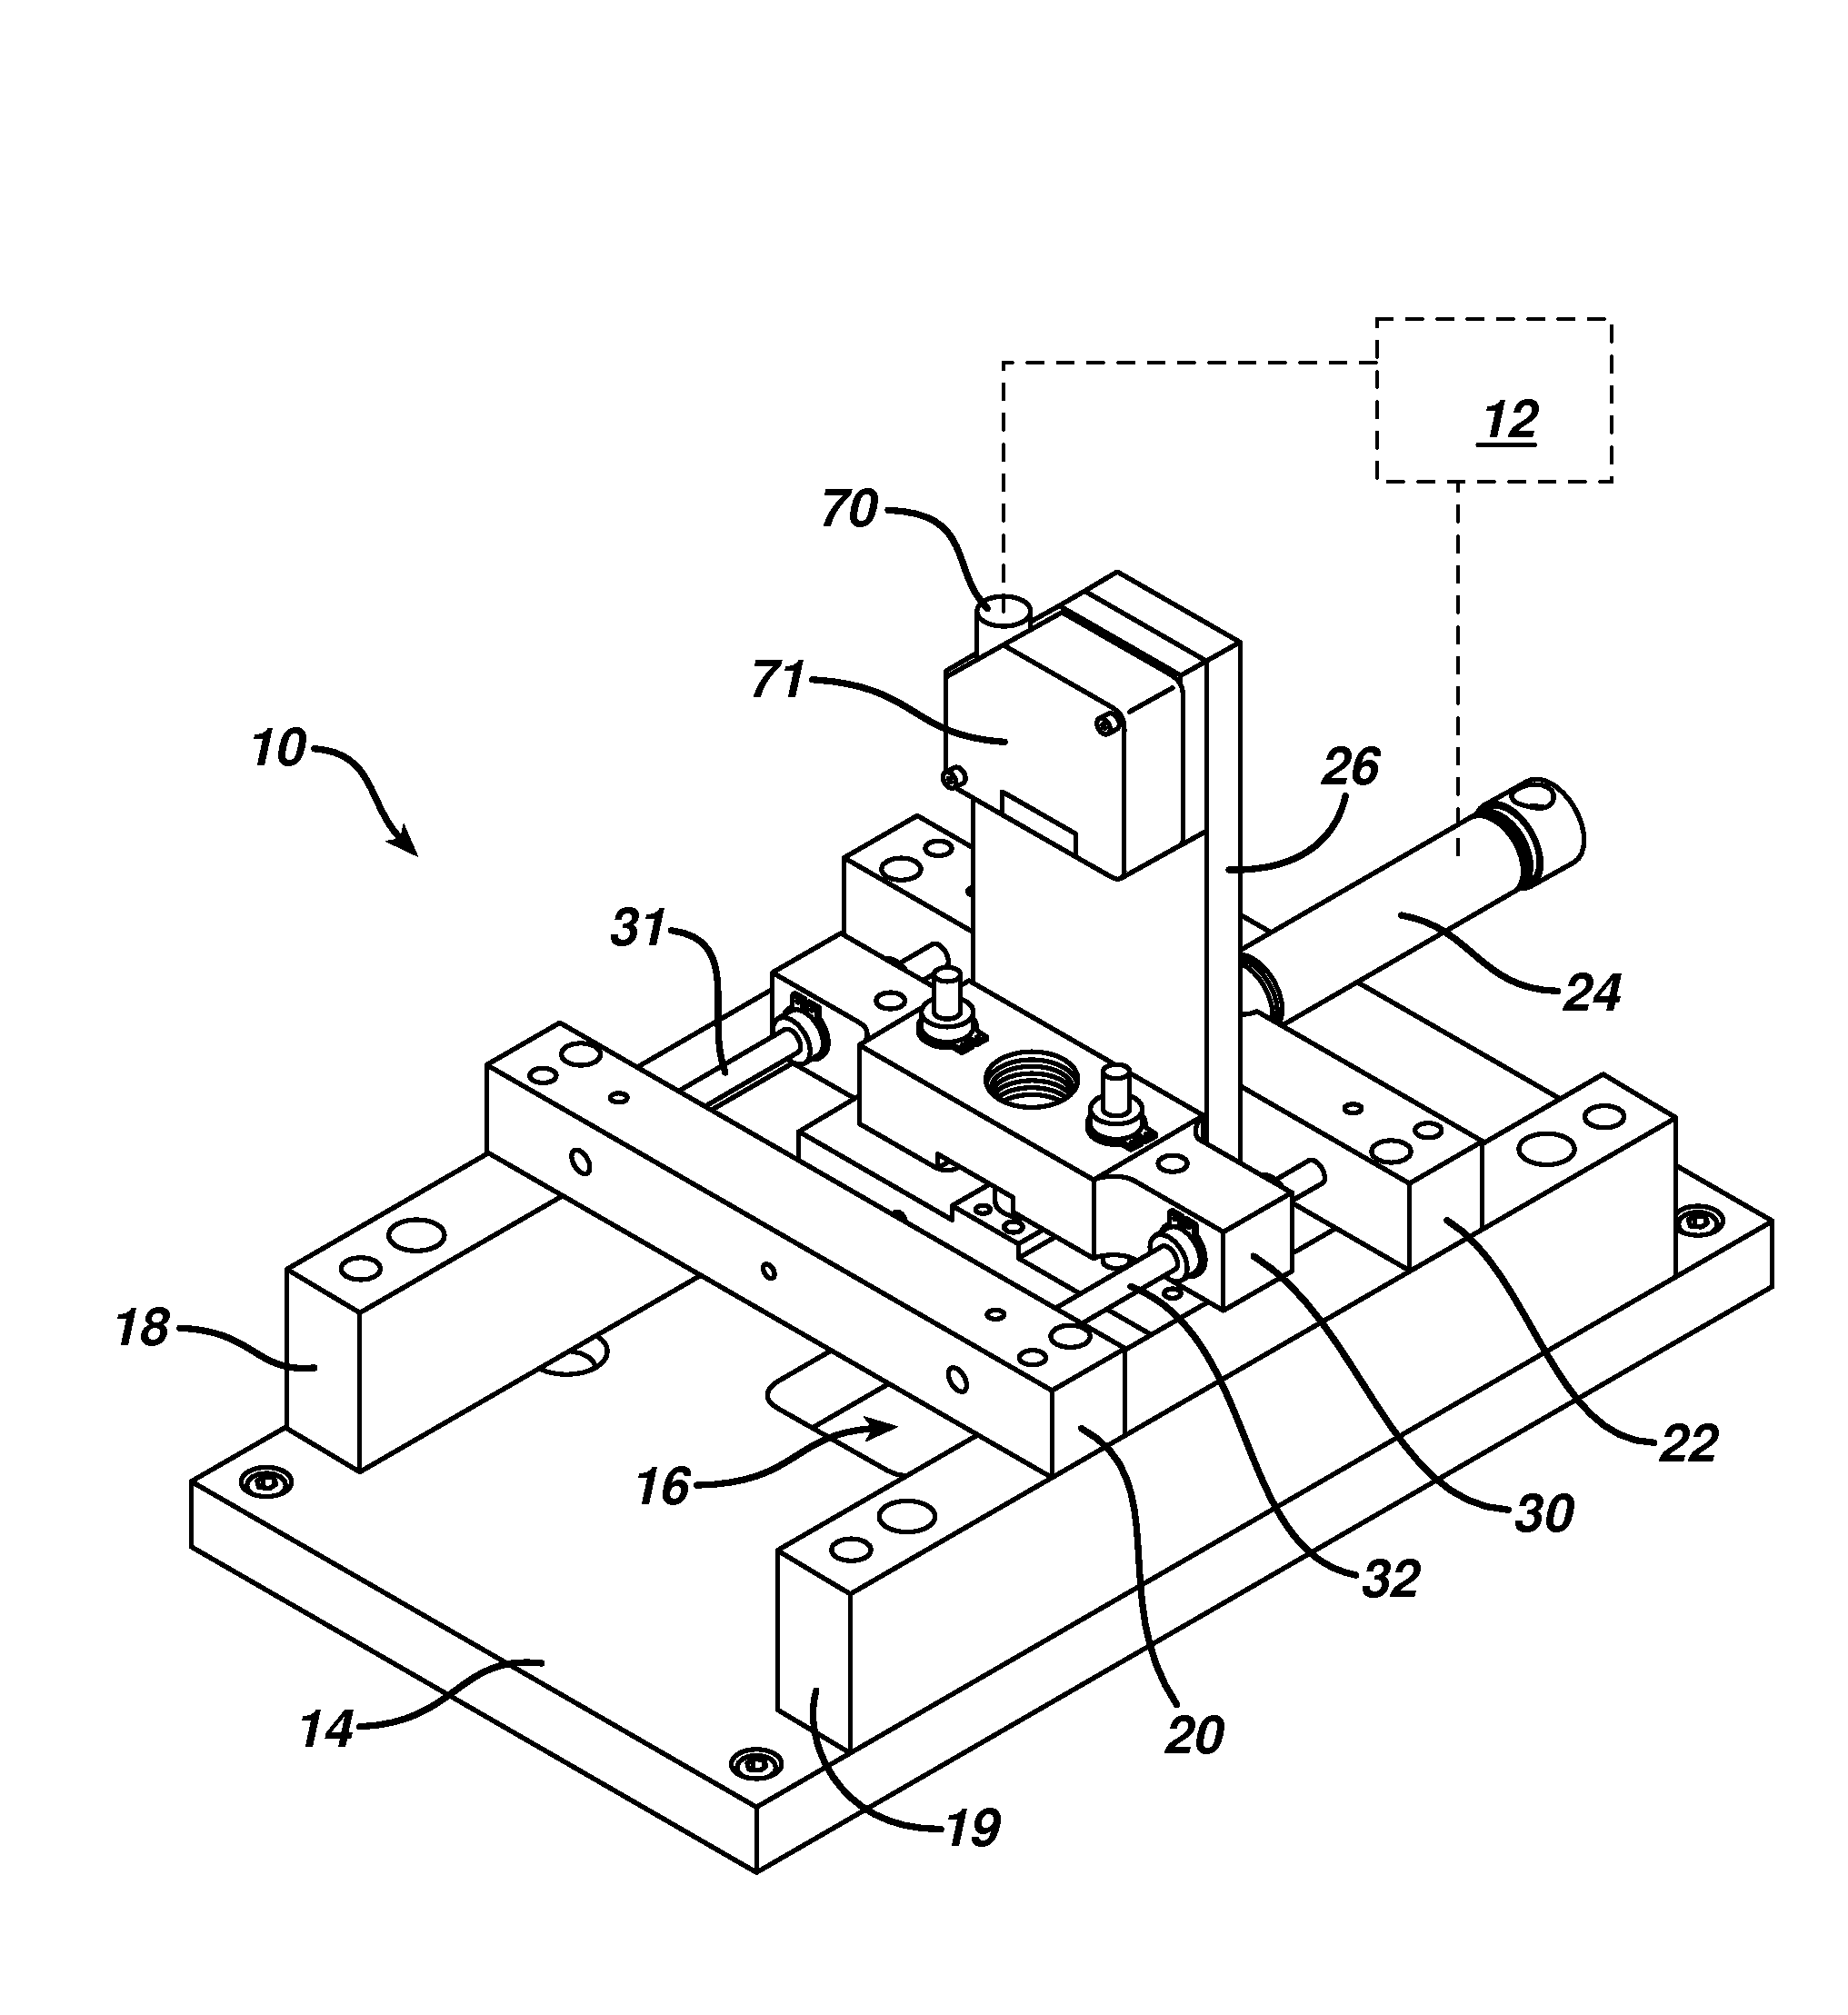 Method and apparatus for testing for the presence of excess drivers in a surgical cartridge